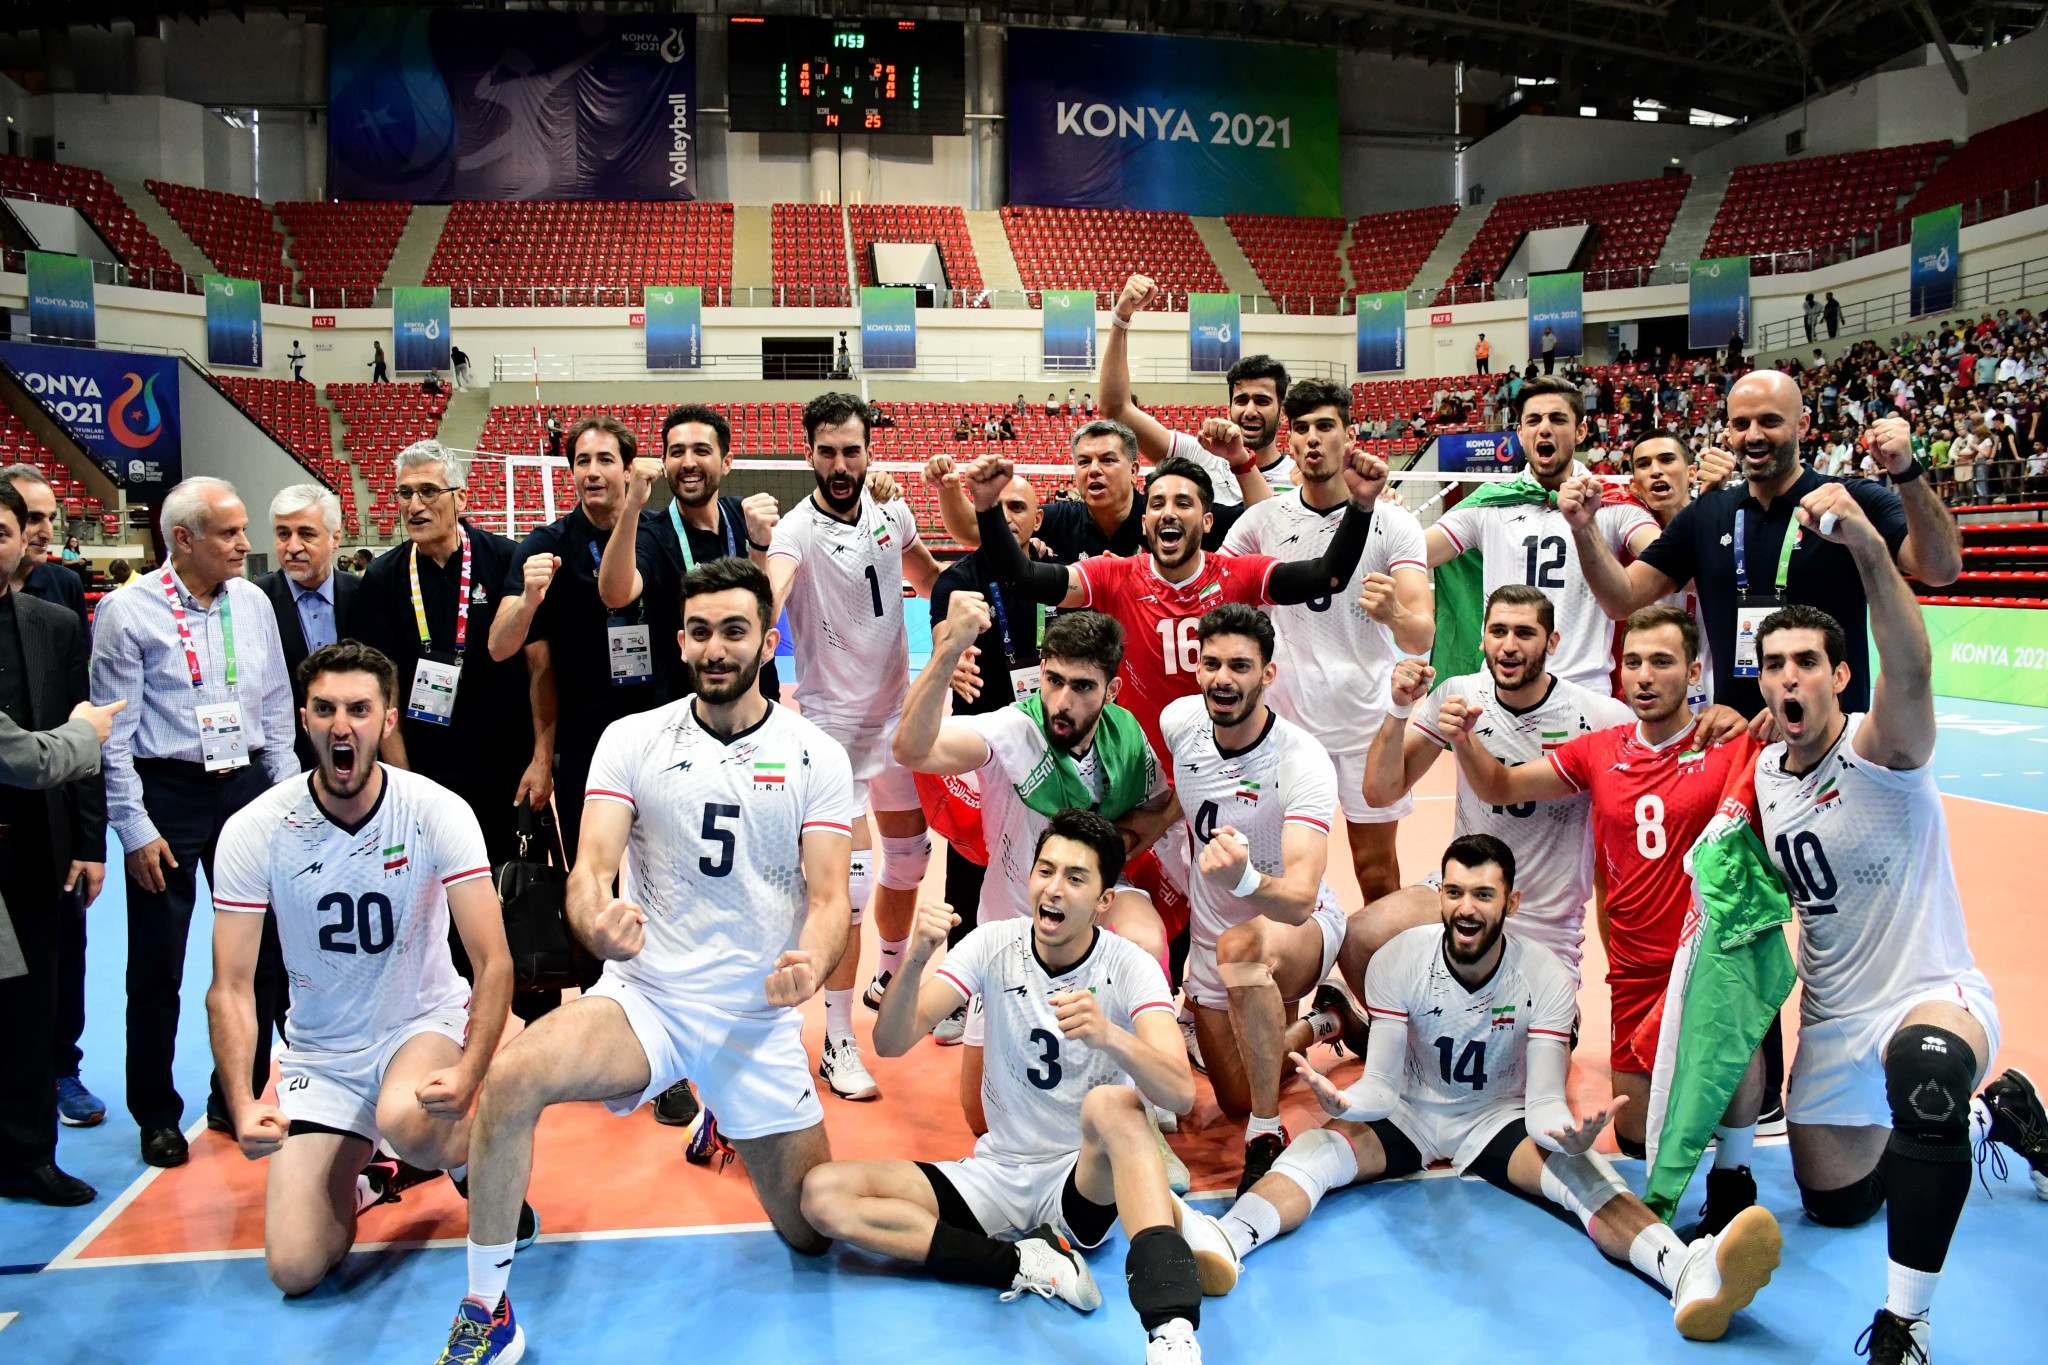 Iran's players celebrate after securing a fourth successive men's volleyball crown with victory over Cameroon ©Konya 2021